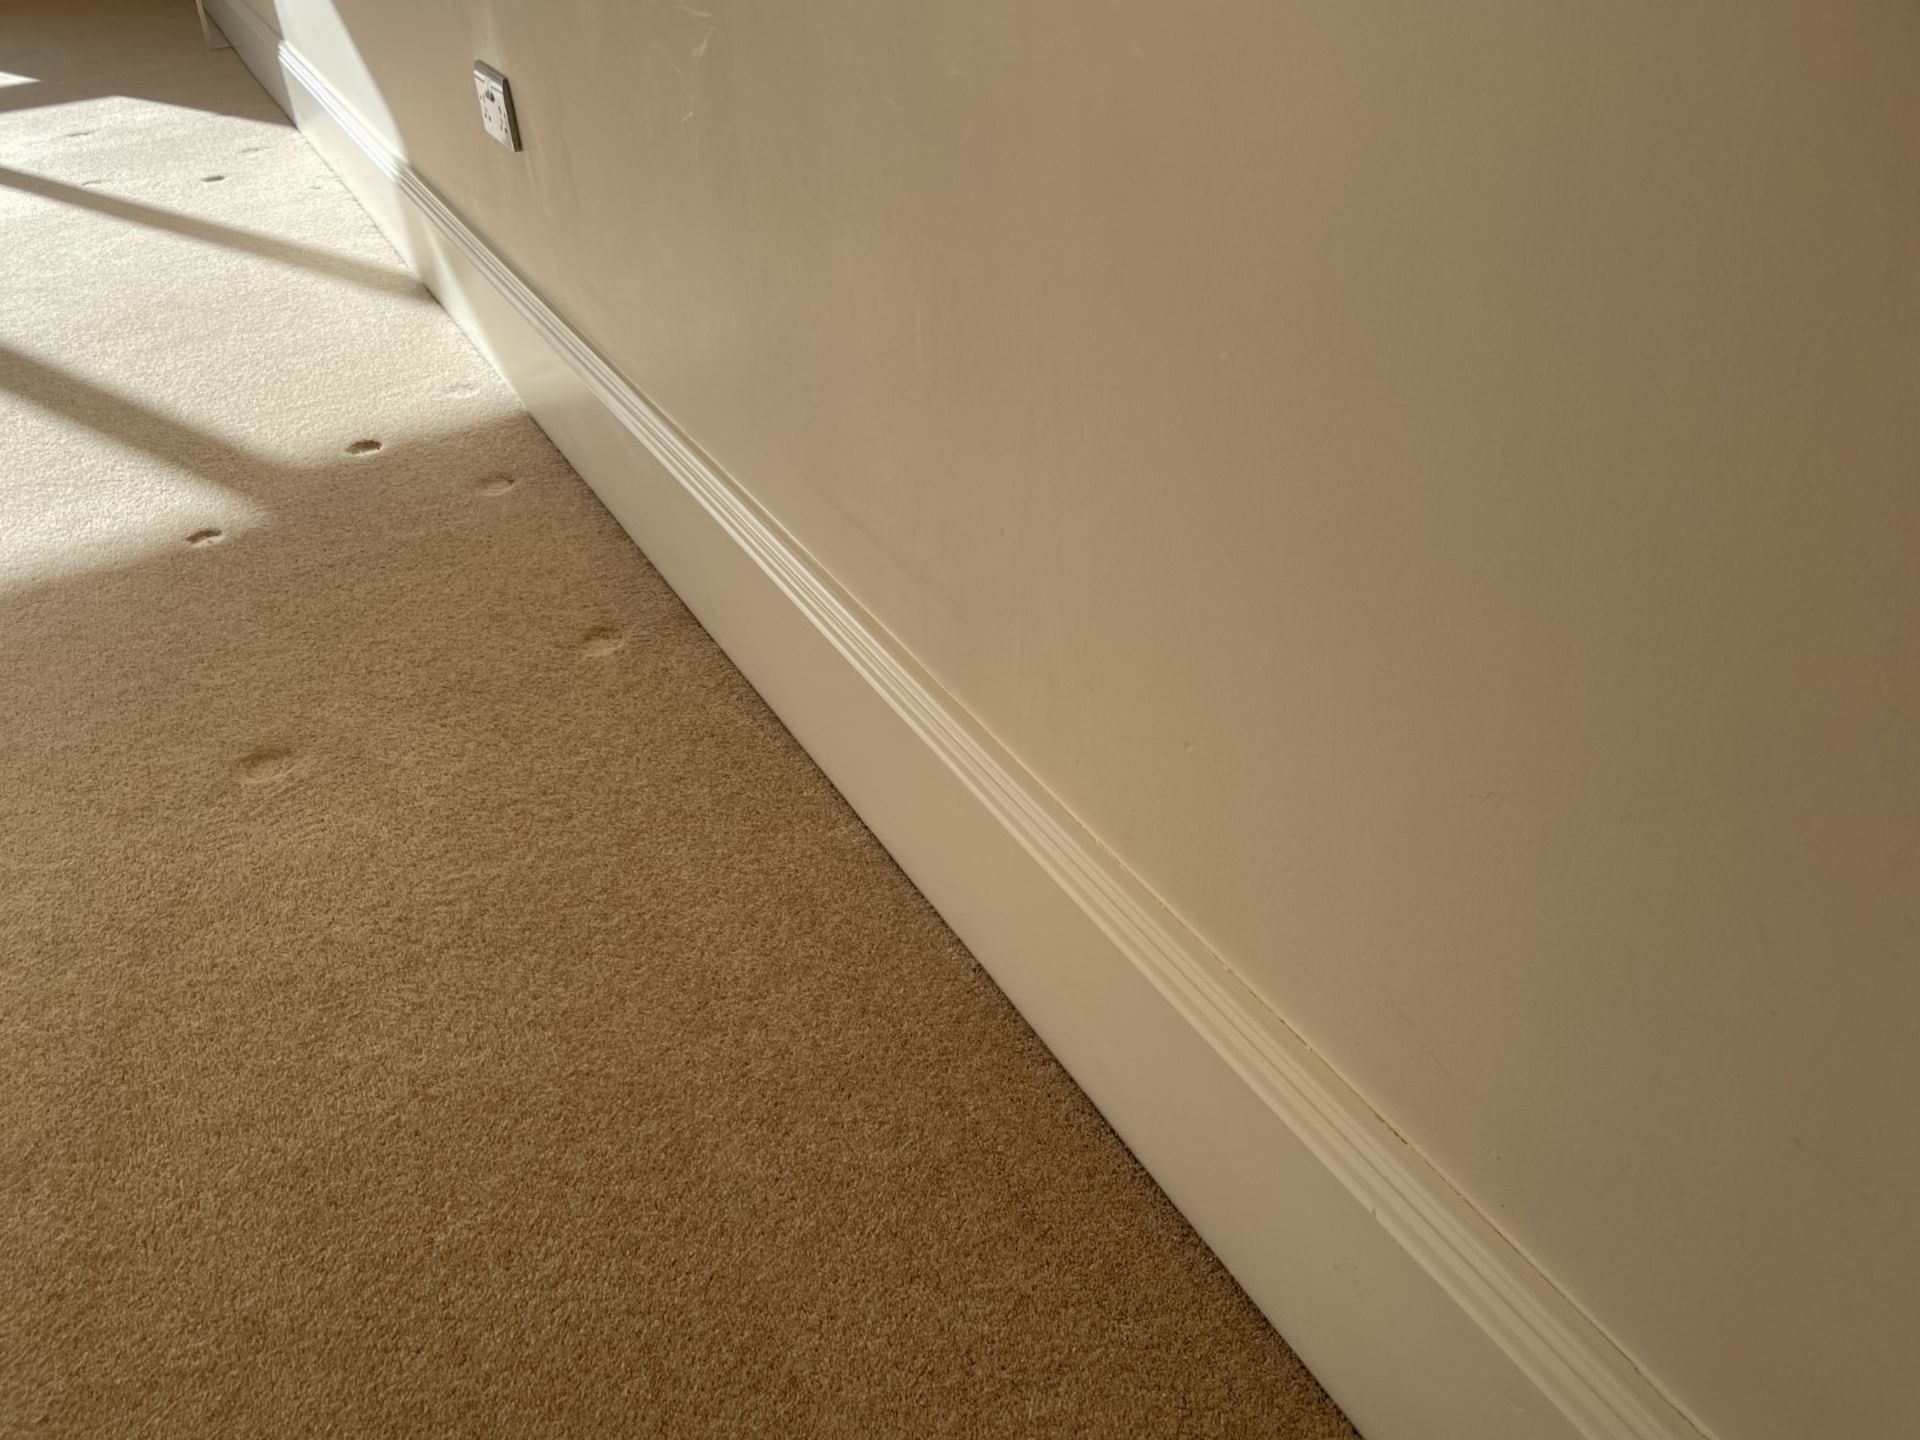 1 x Approximately 22-Metres of Painted Timber Wooden Skirting Boards, In White - Ref: PAN224 - CL896 - Image 6 of 10